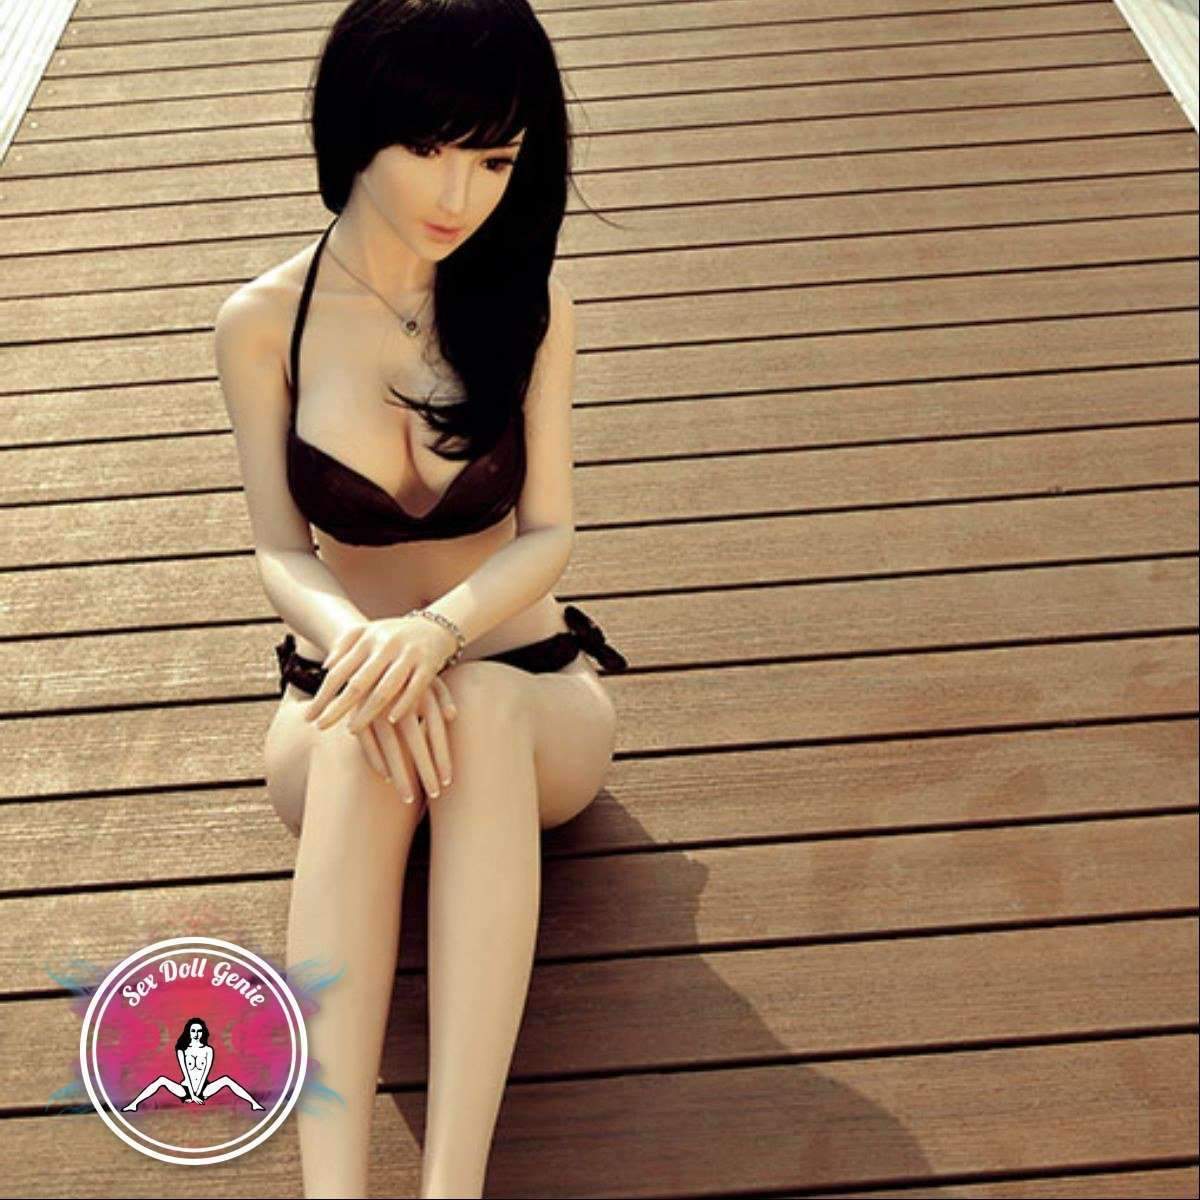 DS Doll - 163Plus - Jiaxin Head - Type 4 D Cup Silicone Doll-20